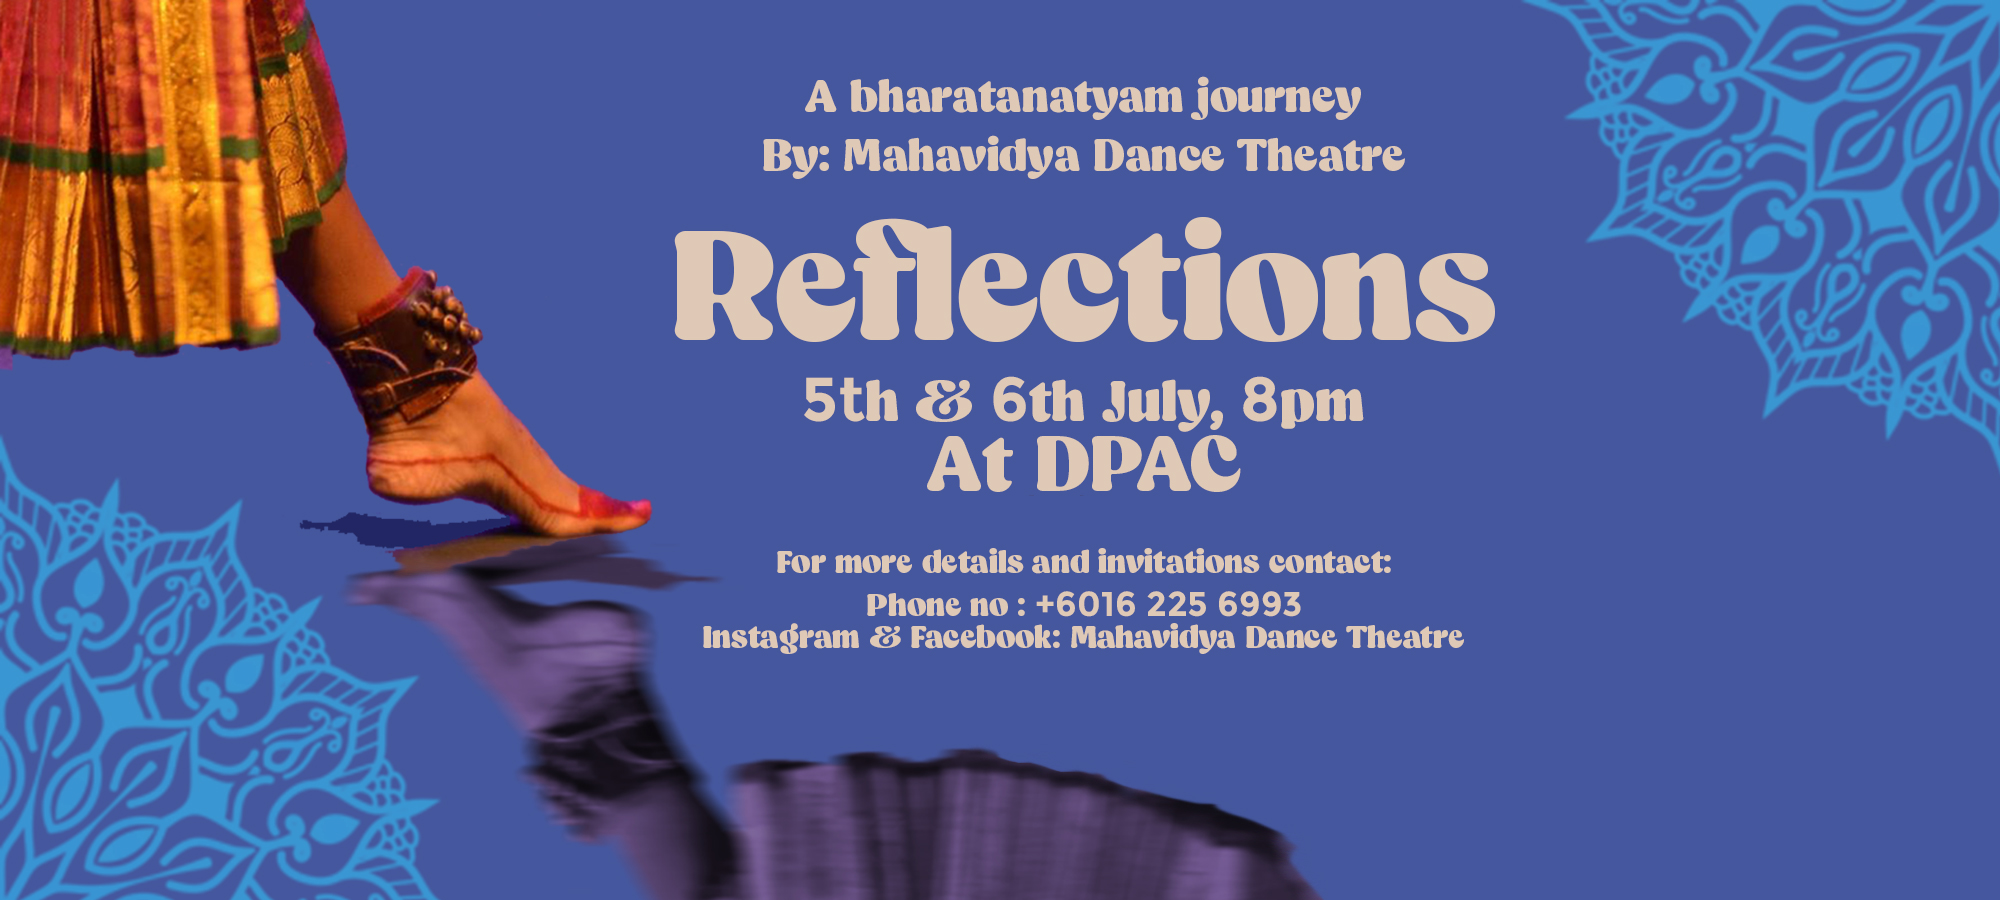 ‘Reflections’ brings a classic Indian story to life – eNews Malaysia